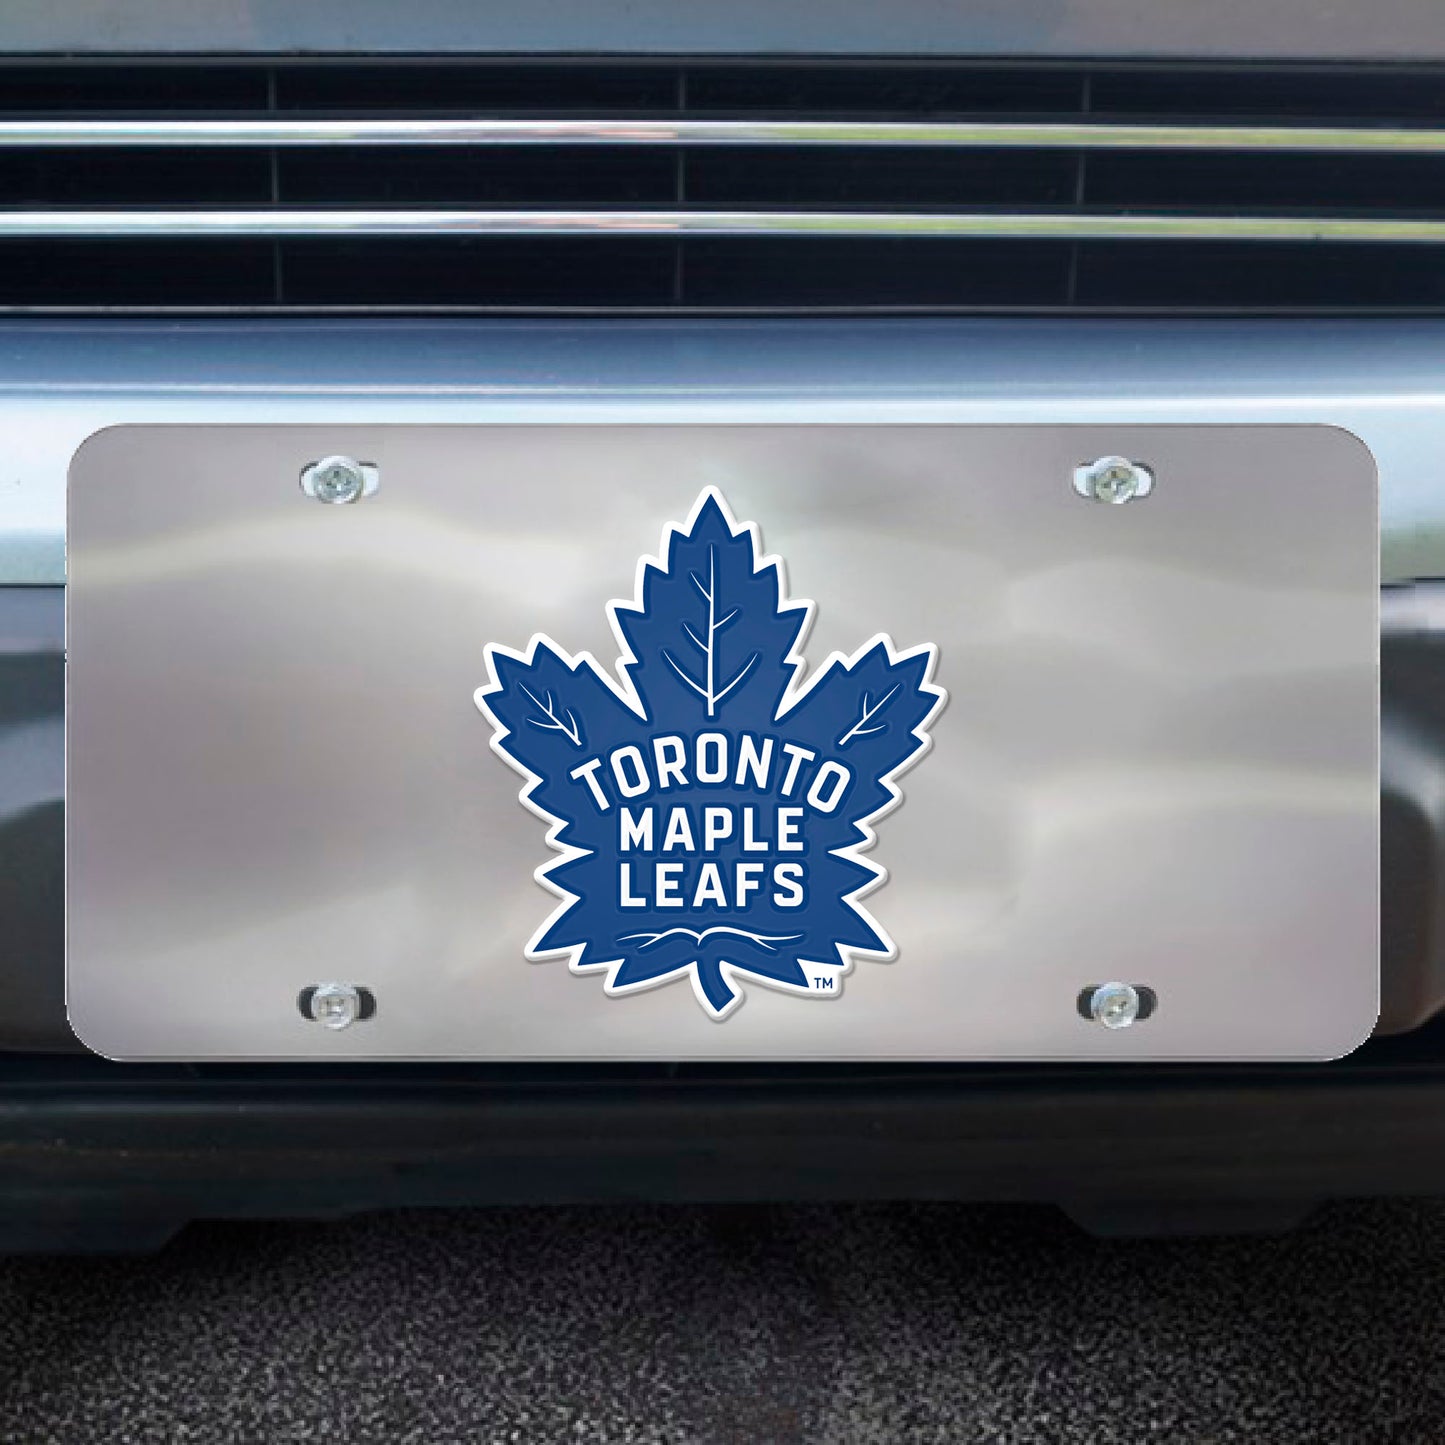 Toronto Maple Leafs 3D Stainless Steel License Plate